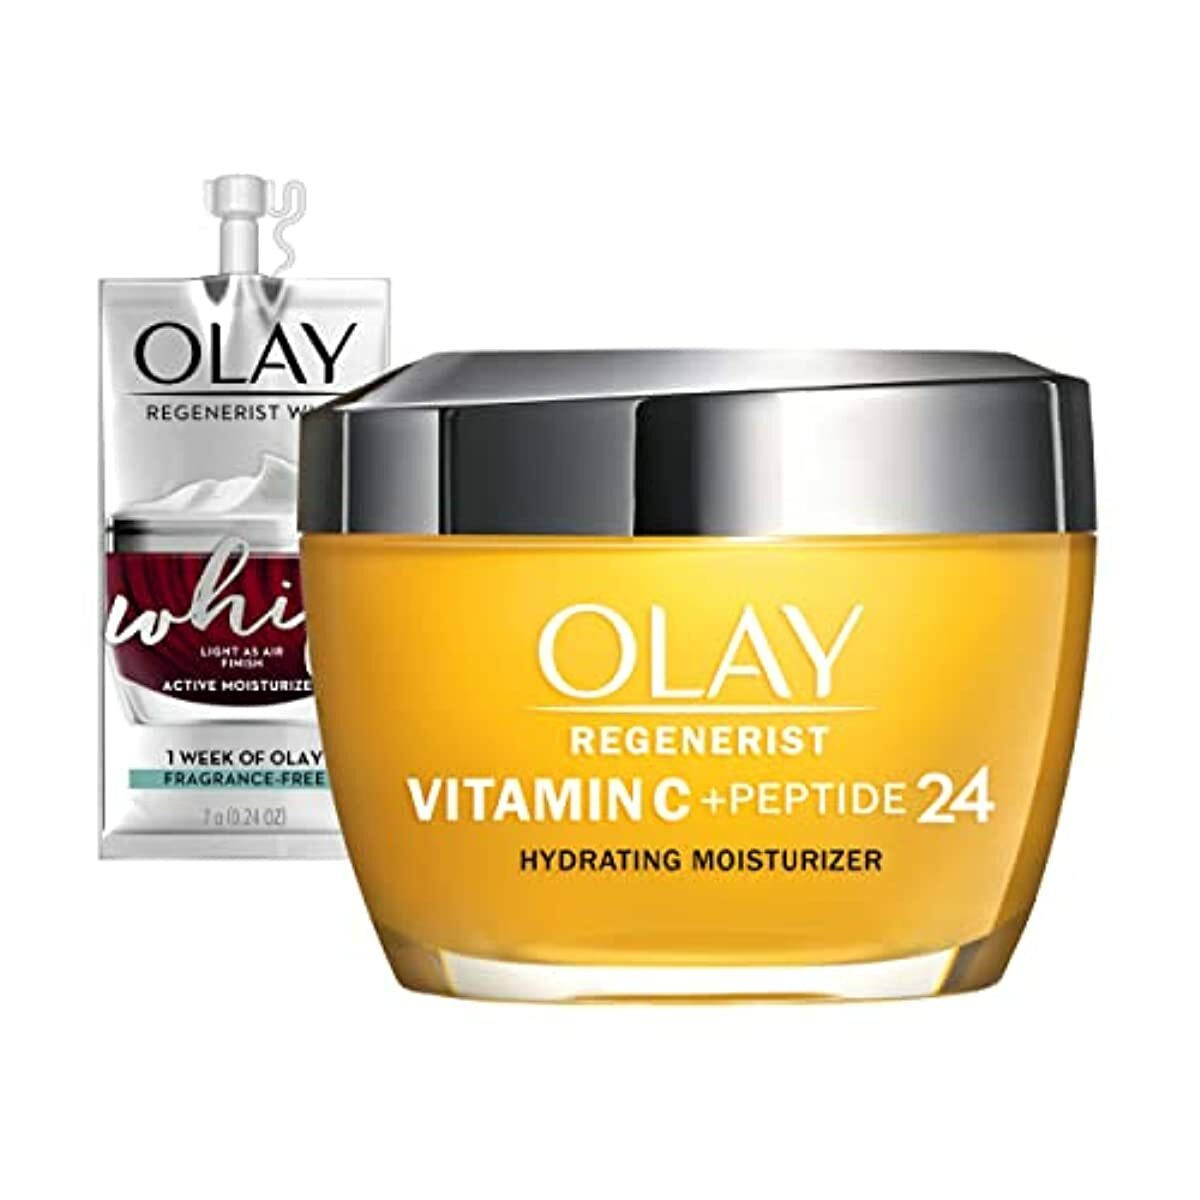 Olay Regenerist Vitamin C + Peptide 24 Brightening Face Moisturizer for Brighter Skin, Lightweight anti aging cream for dark spots, Includes Olay Whip Travel size for dry skin